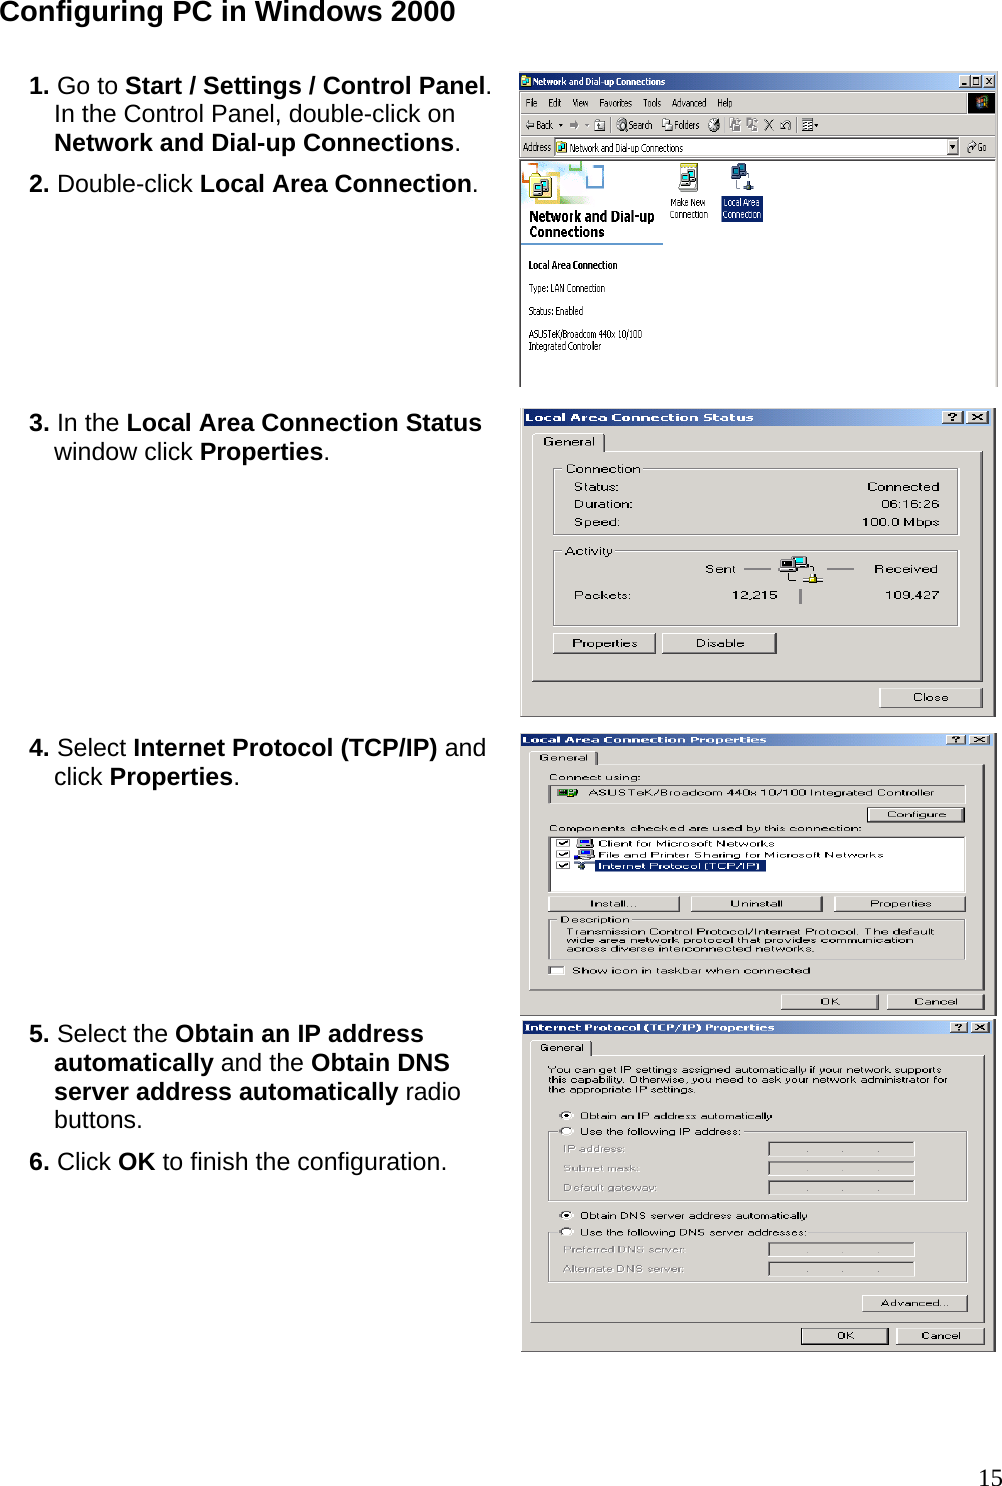 Configuring PC in Windows 2000  1. Go to Start / Settings / Control Panel. In the Control Panel, double-click on Network and Dial-up Connections. 2. Double-click Local Area Connection.  3. In the Local Area Connection Status window click Properties. 4. Select Internet Protocol (TCP/IP) and click Properties.  5. Select the Obtain an IP address automatically and the Obtain DNS server address automatically radio buttons. 6. Click OK to finish the configuration.    15